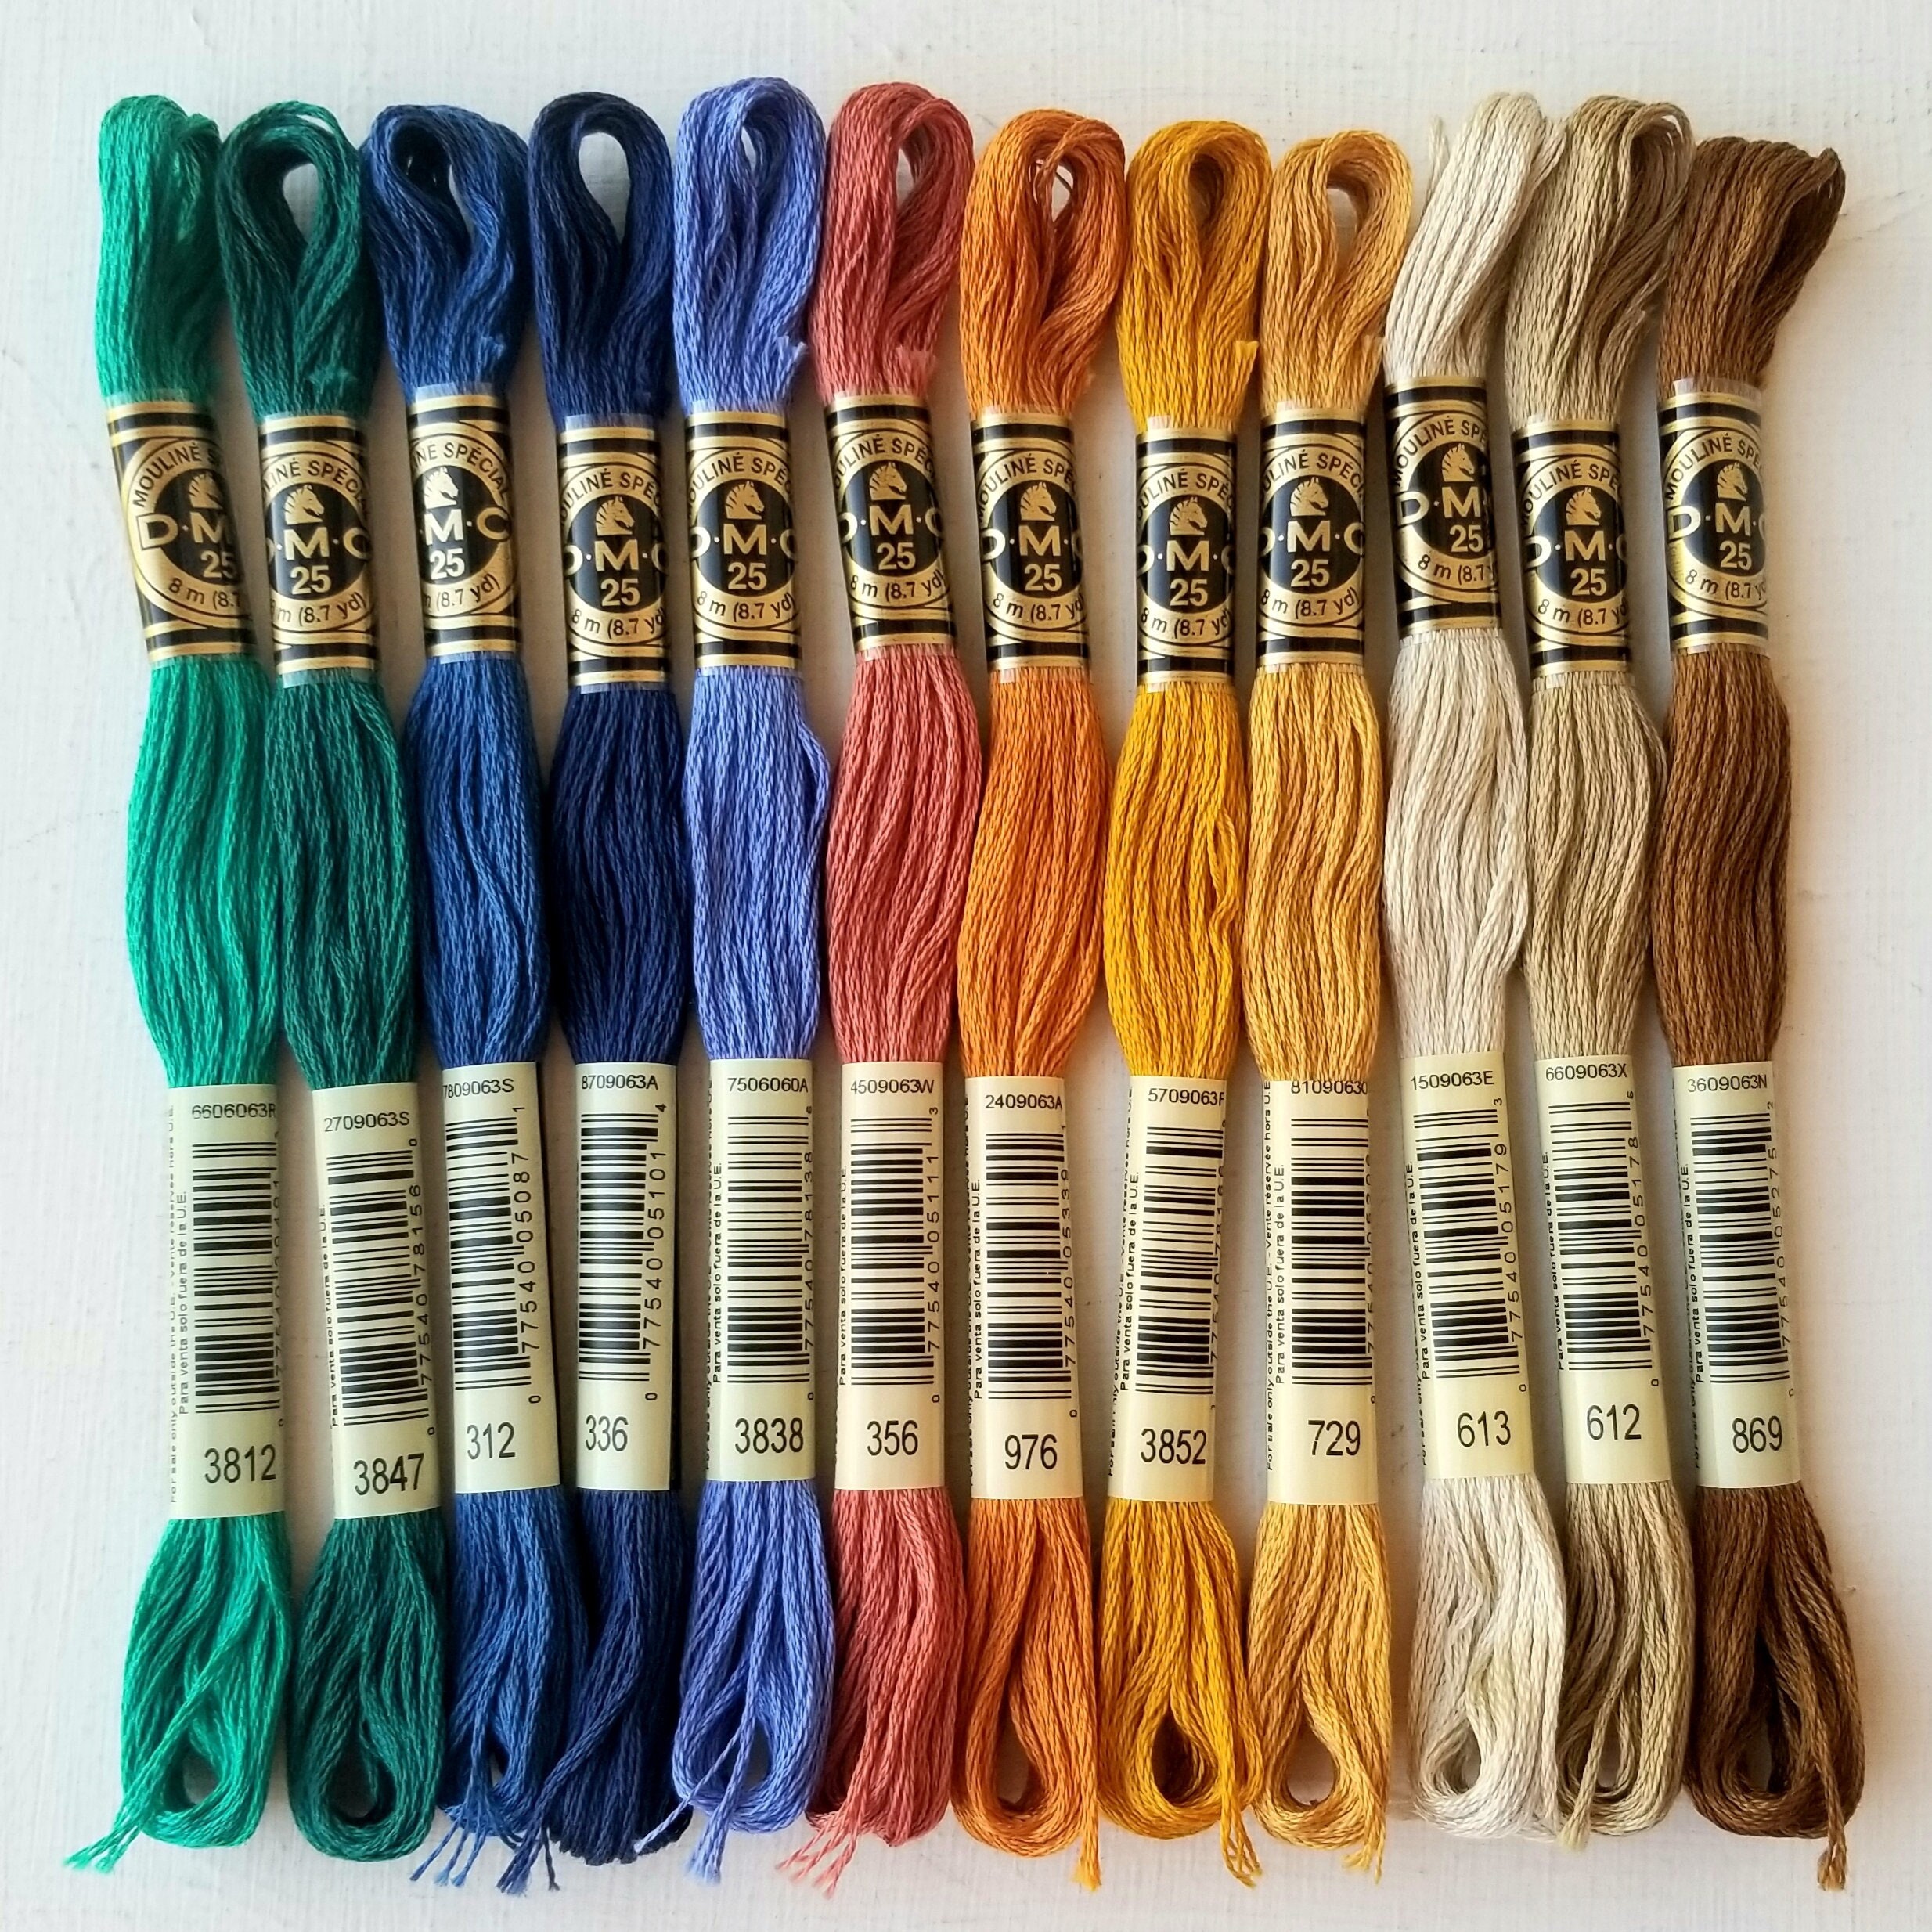 DMC Embroidery Floss Pack,Colorful Holiday Collection,DMC Embroidery  Thread, Kit Include 30 Cotton Assorted Color Bundle with DMC Cross Stitch  Hand